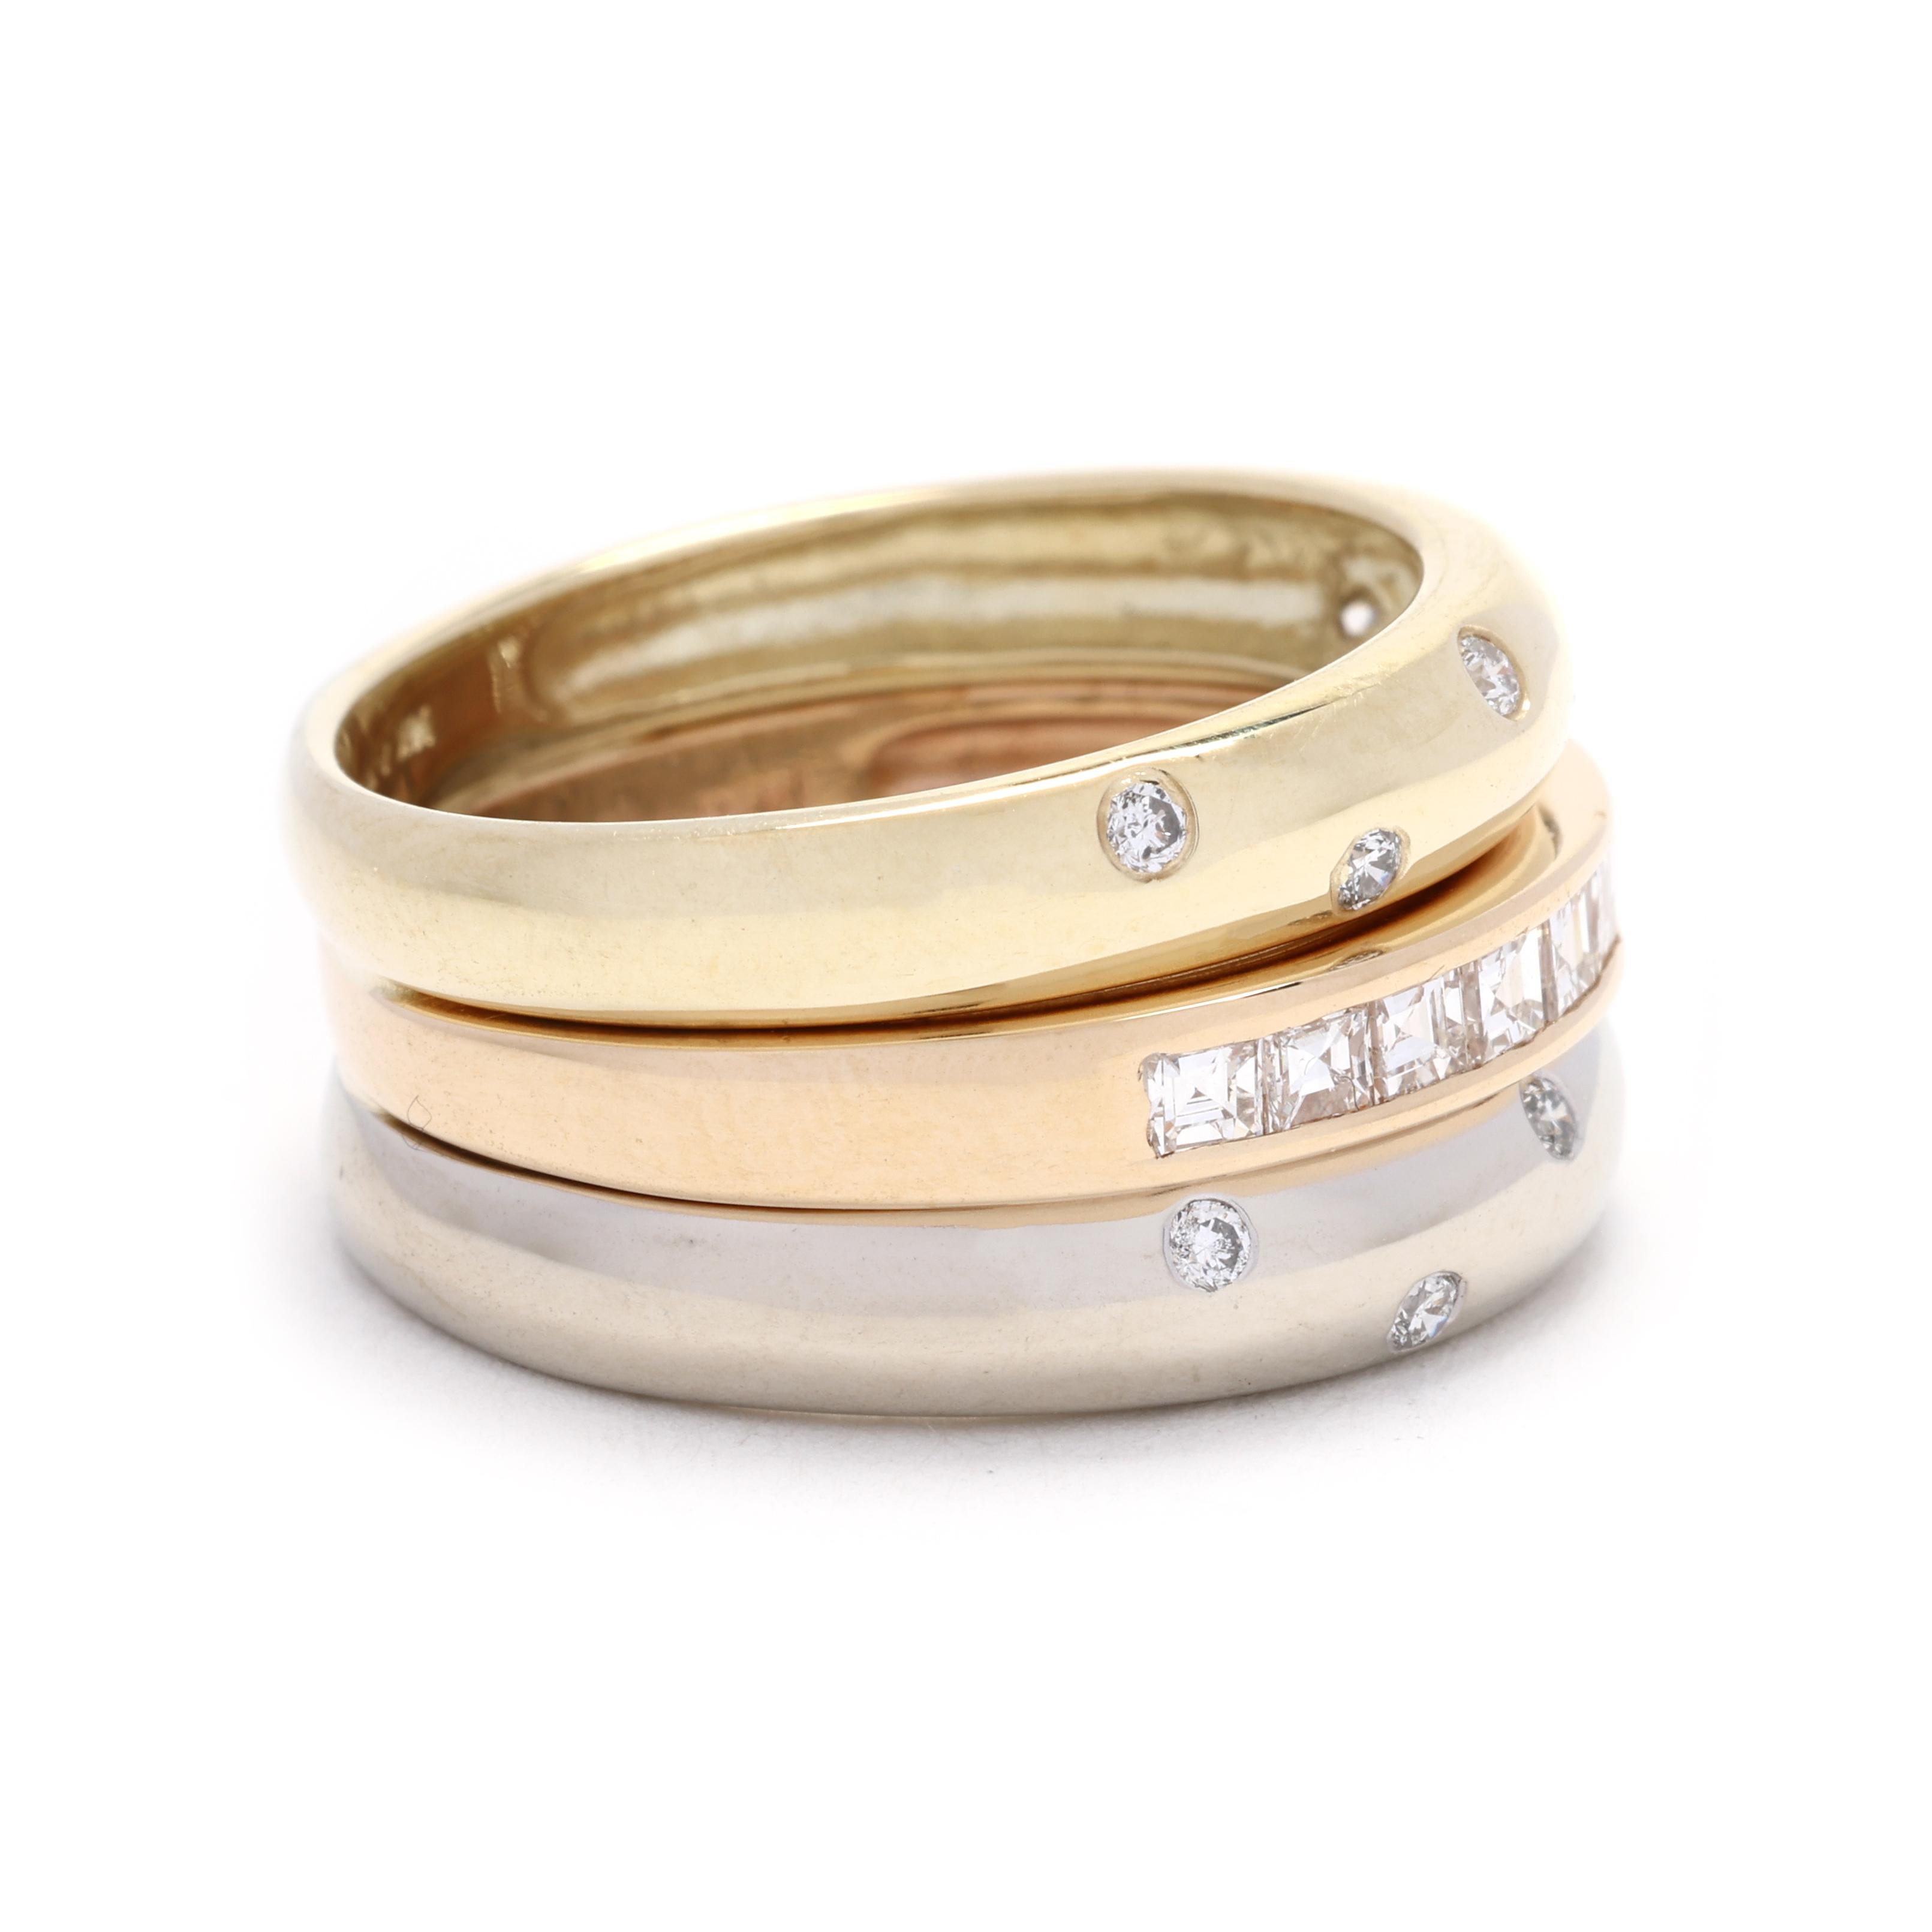 Elevate your jewelry collection with this stunning 0.75ctw Diamond and Multi Gold Stacked Band Ring. Crafted in luxurious 14k gold, this eye-catching ring features a unique stacked band design adorned with sparkling diamonds, creating a glamorous